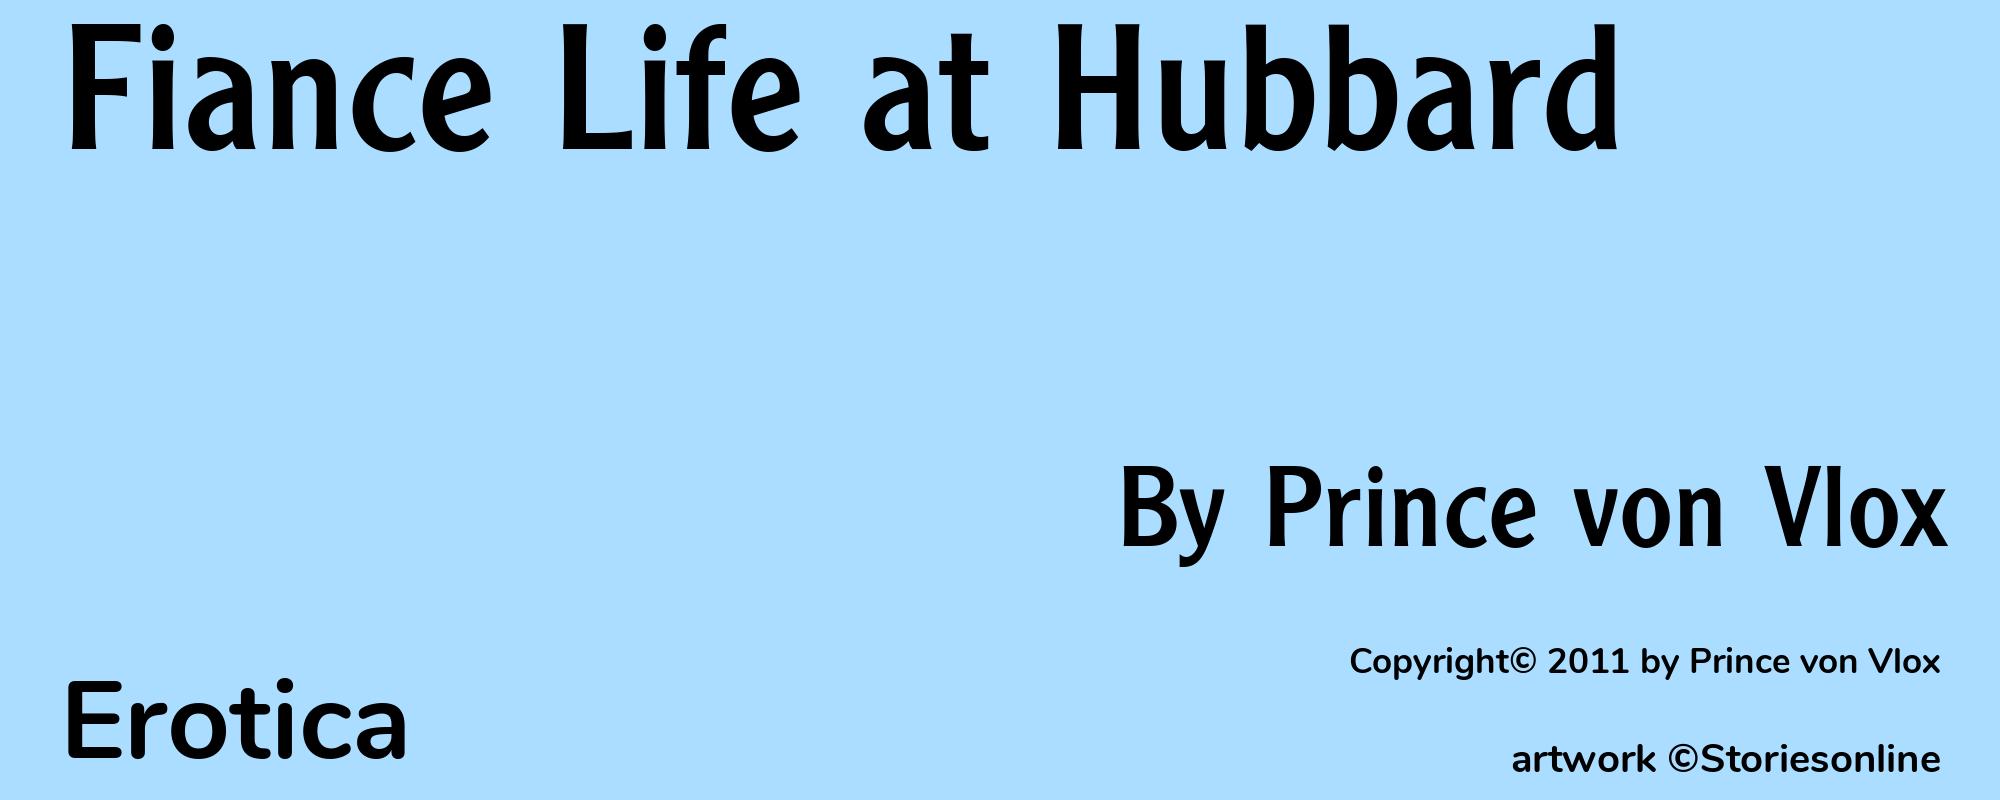 Fiance Life at Hubbard - Cover